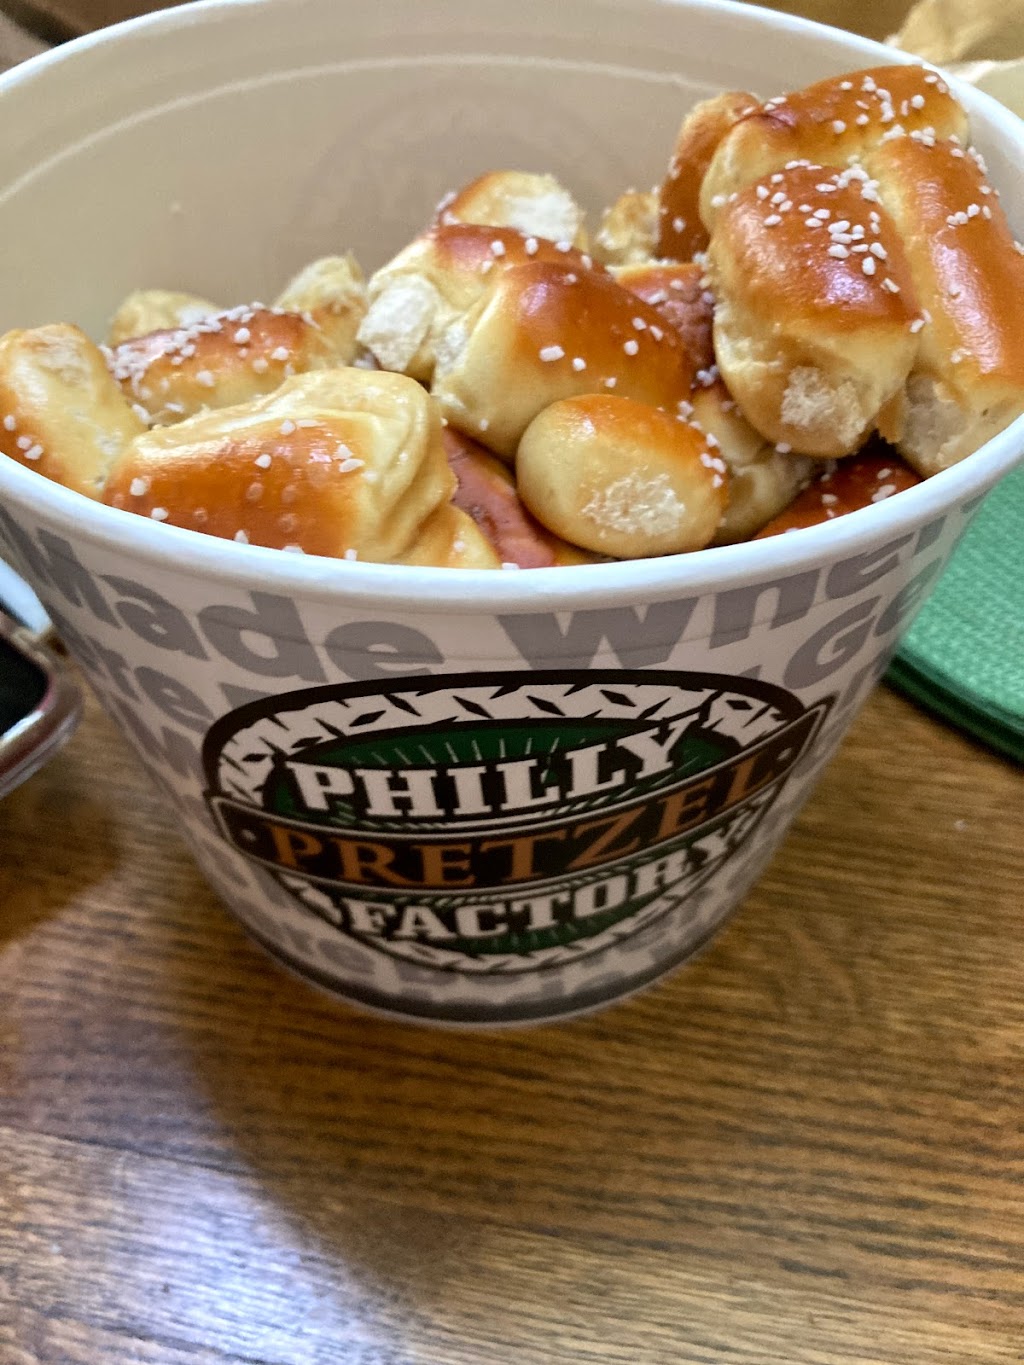 Philly Pretzel Factory | 1075 West Chester Pike, West Chester, PA 19382 | Phone: (610) 918-7100